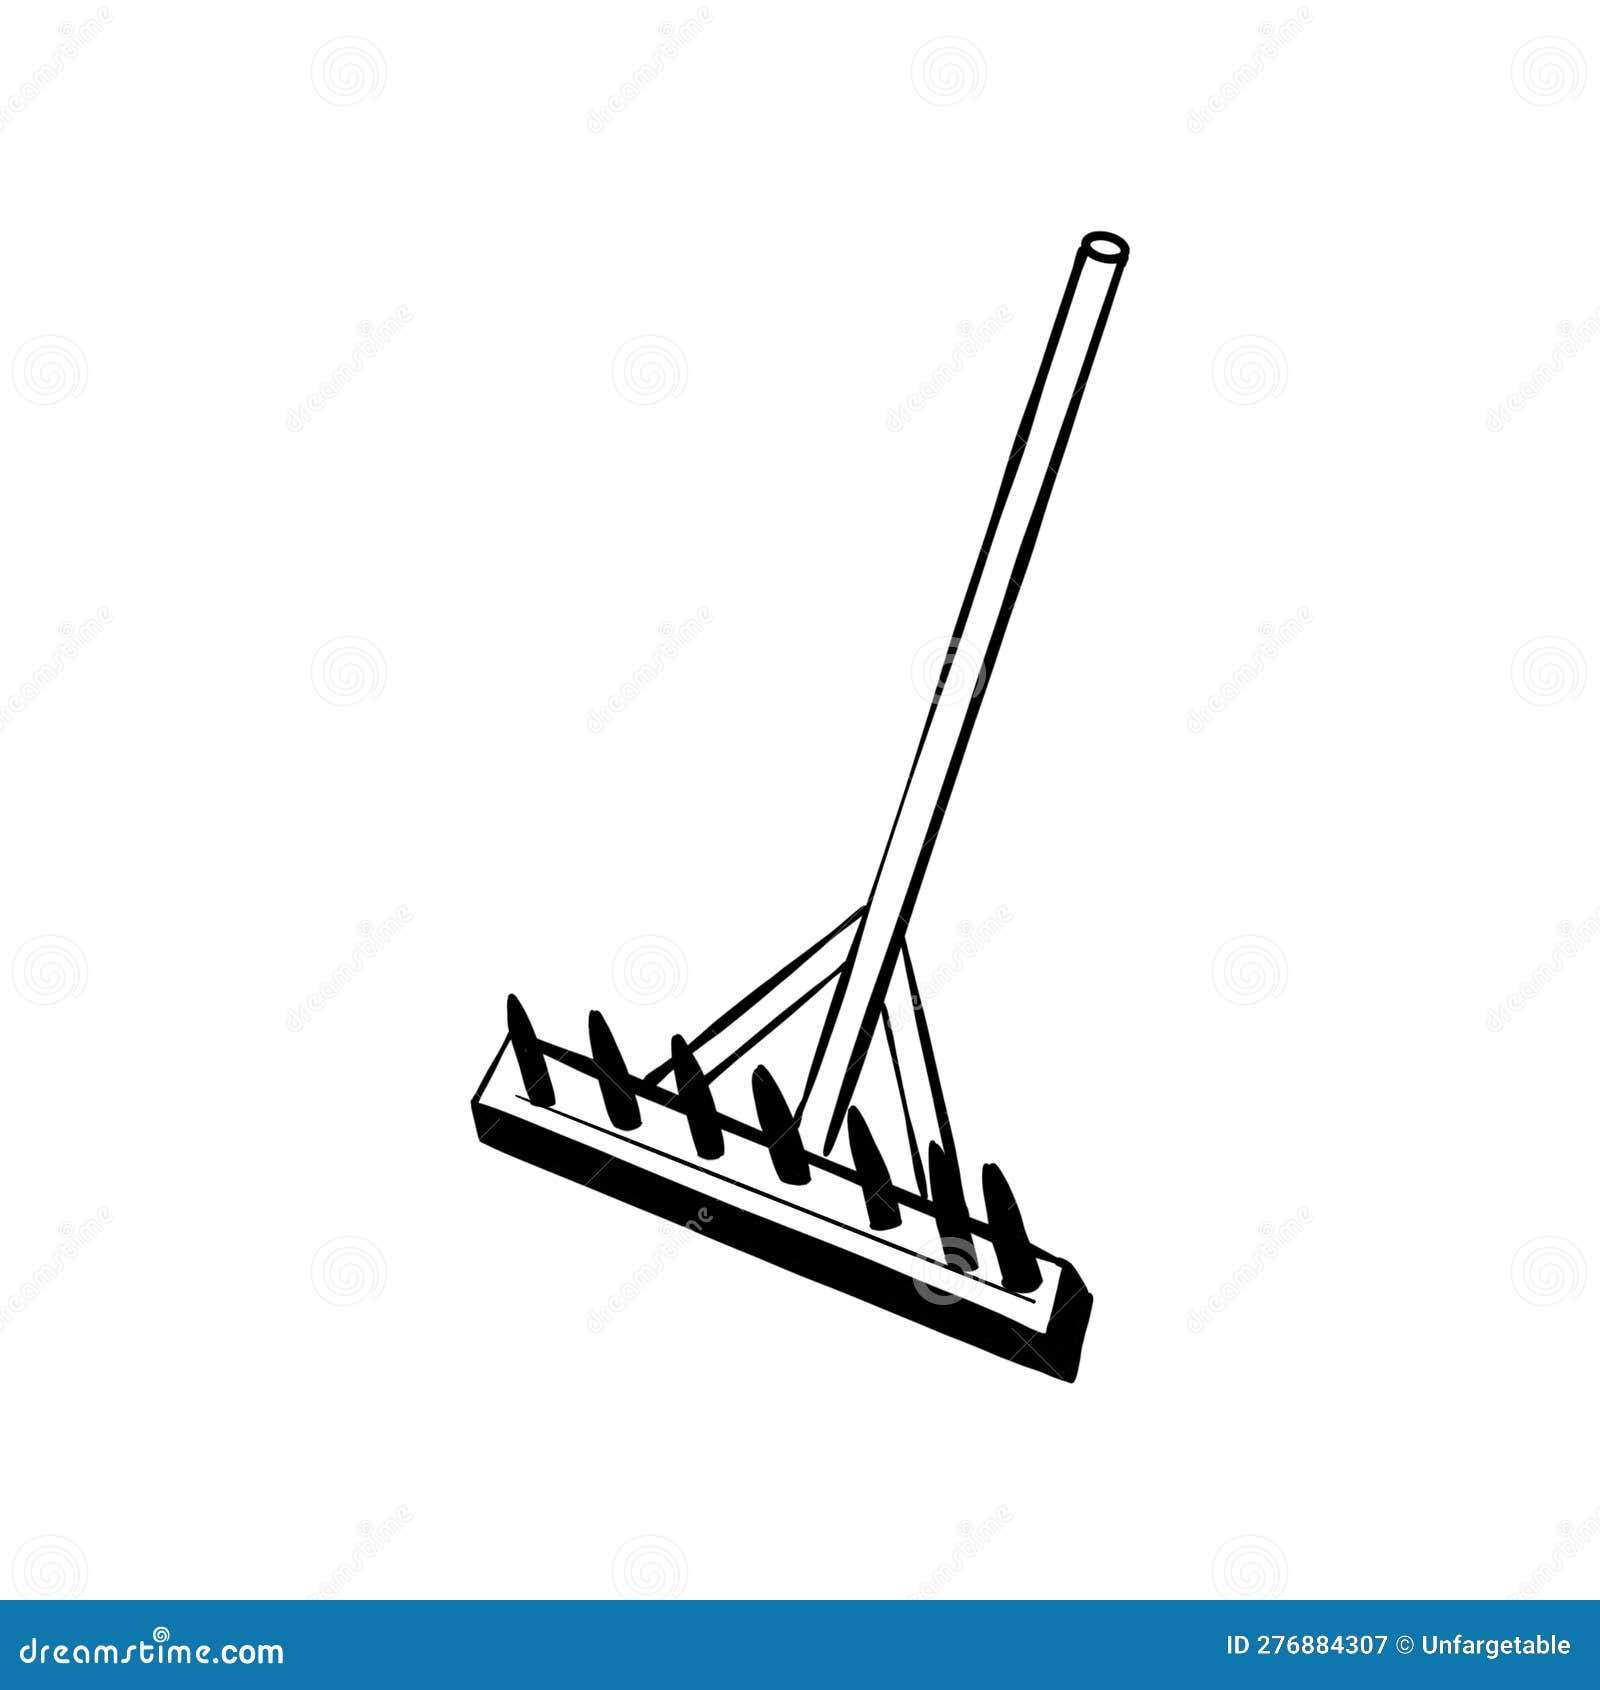 Vector Sketch Hand Drawn Rake Silhouette, Line Art with Black Lines ...